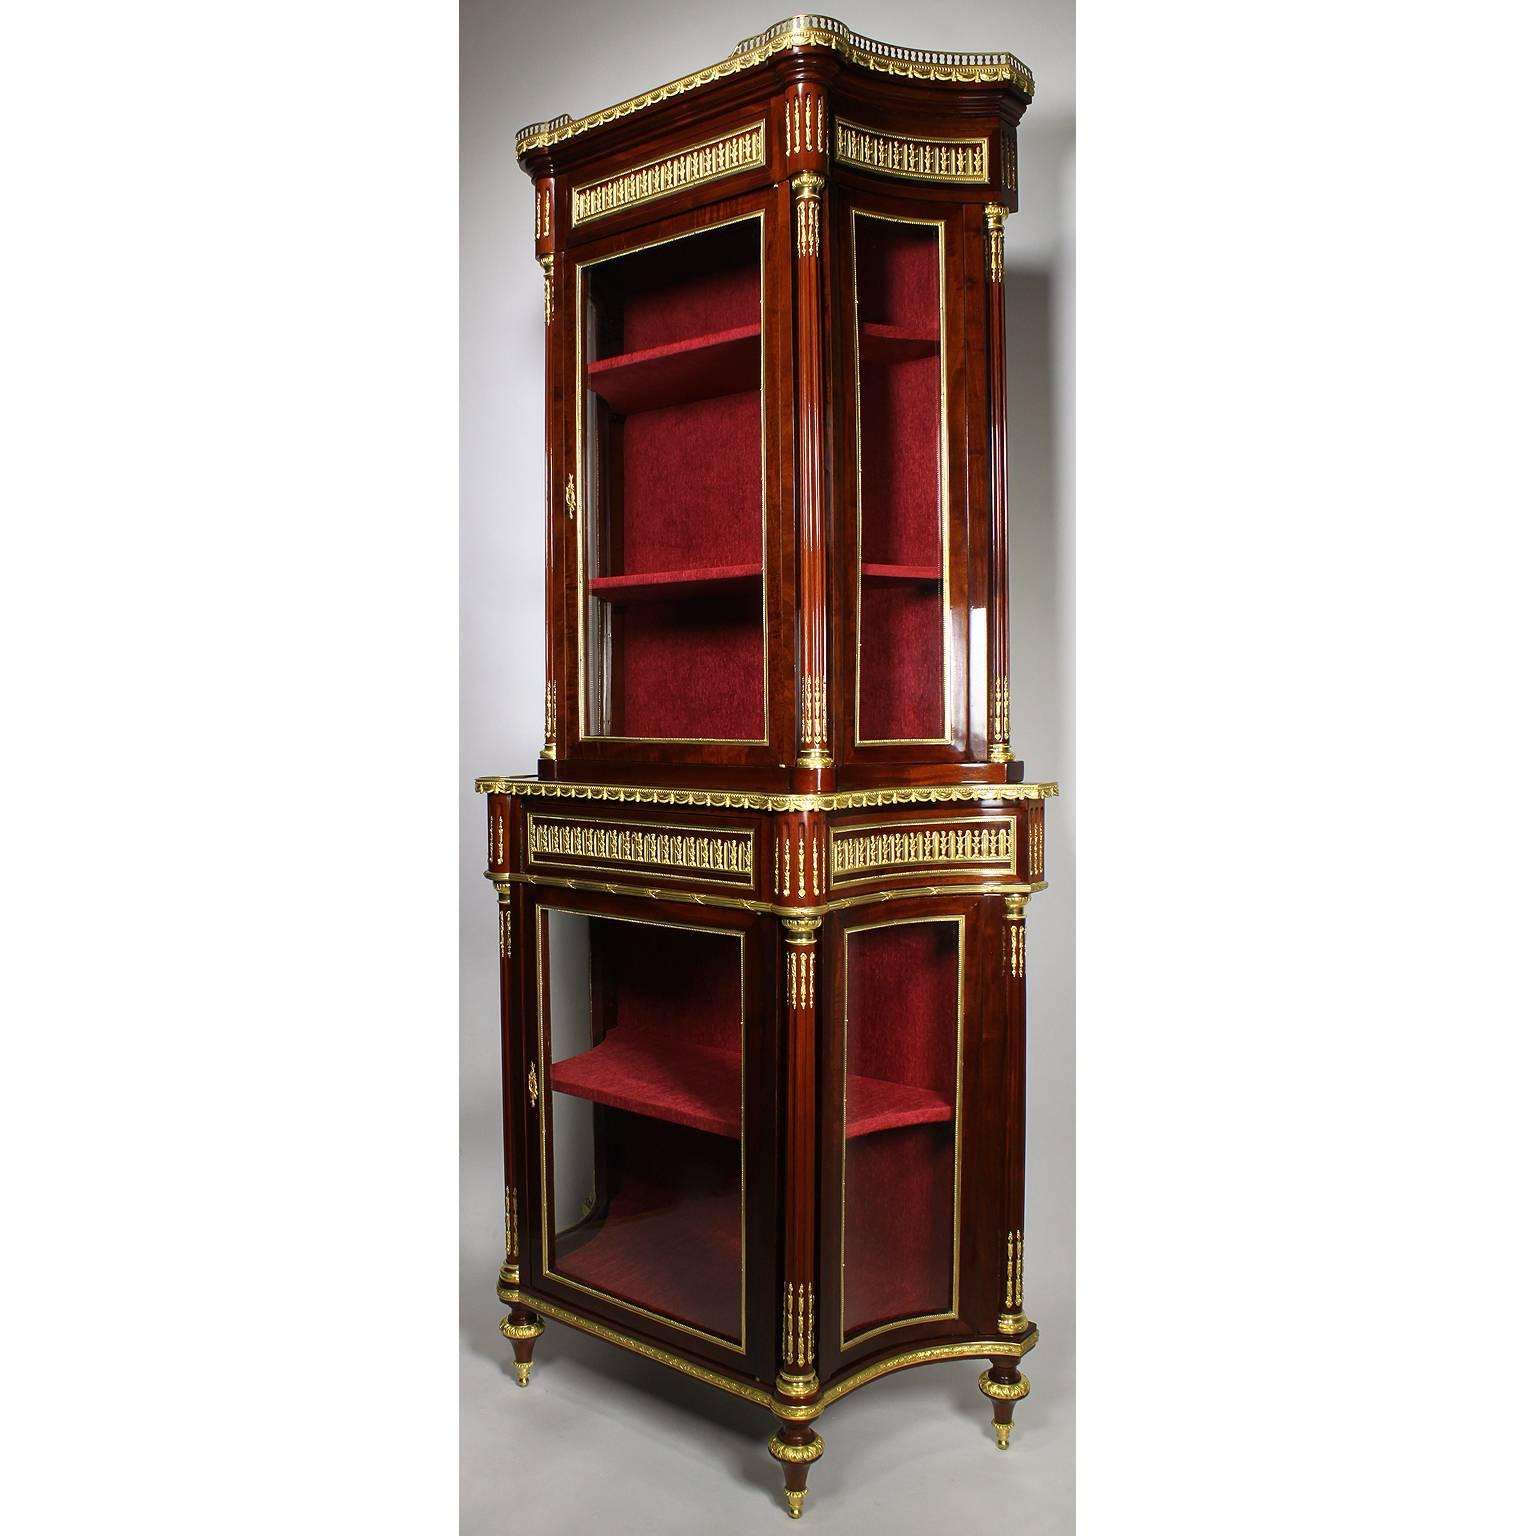 A fine French 19th century Louis XVI style mahogany and ormolu mounted two-tier vitrine cabinet. The upper section with a single glass front door below a pierced gilt-bronze floral railing and bowed glass side panels, the top with a draped gallery